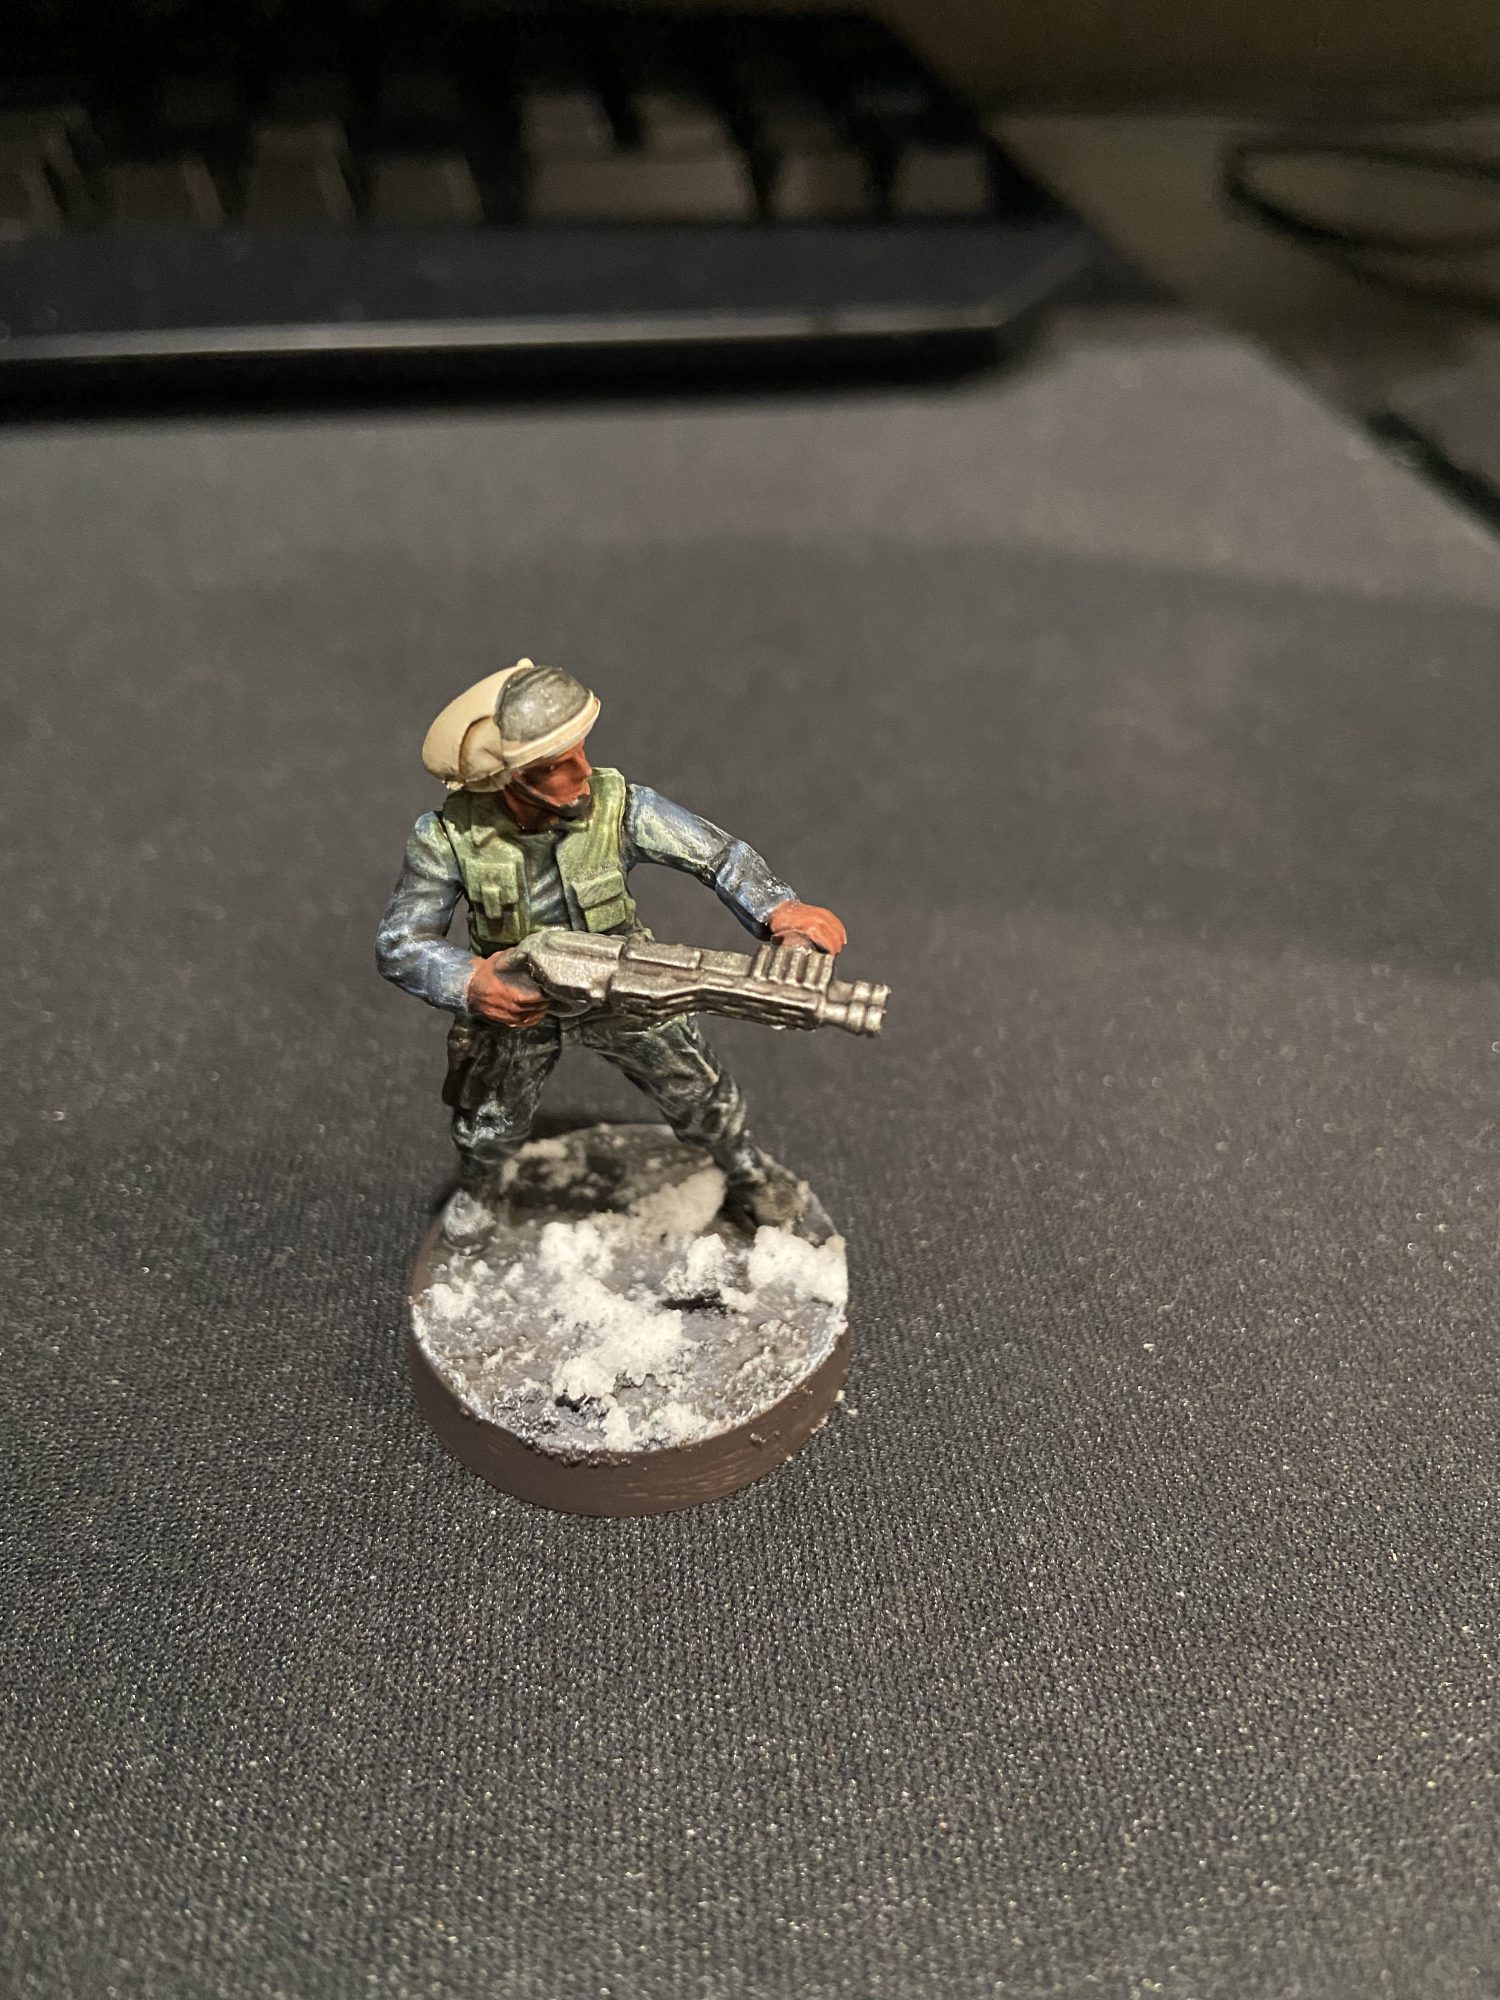 A Star Wars Legion Rebel with a green jacket and blue under layer, the base is covered in snow. Credit Jon.Kil